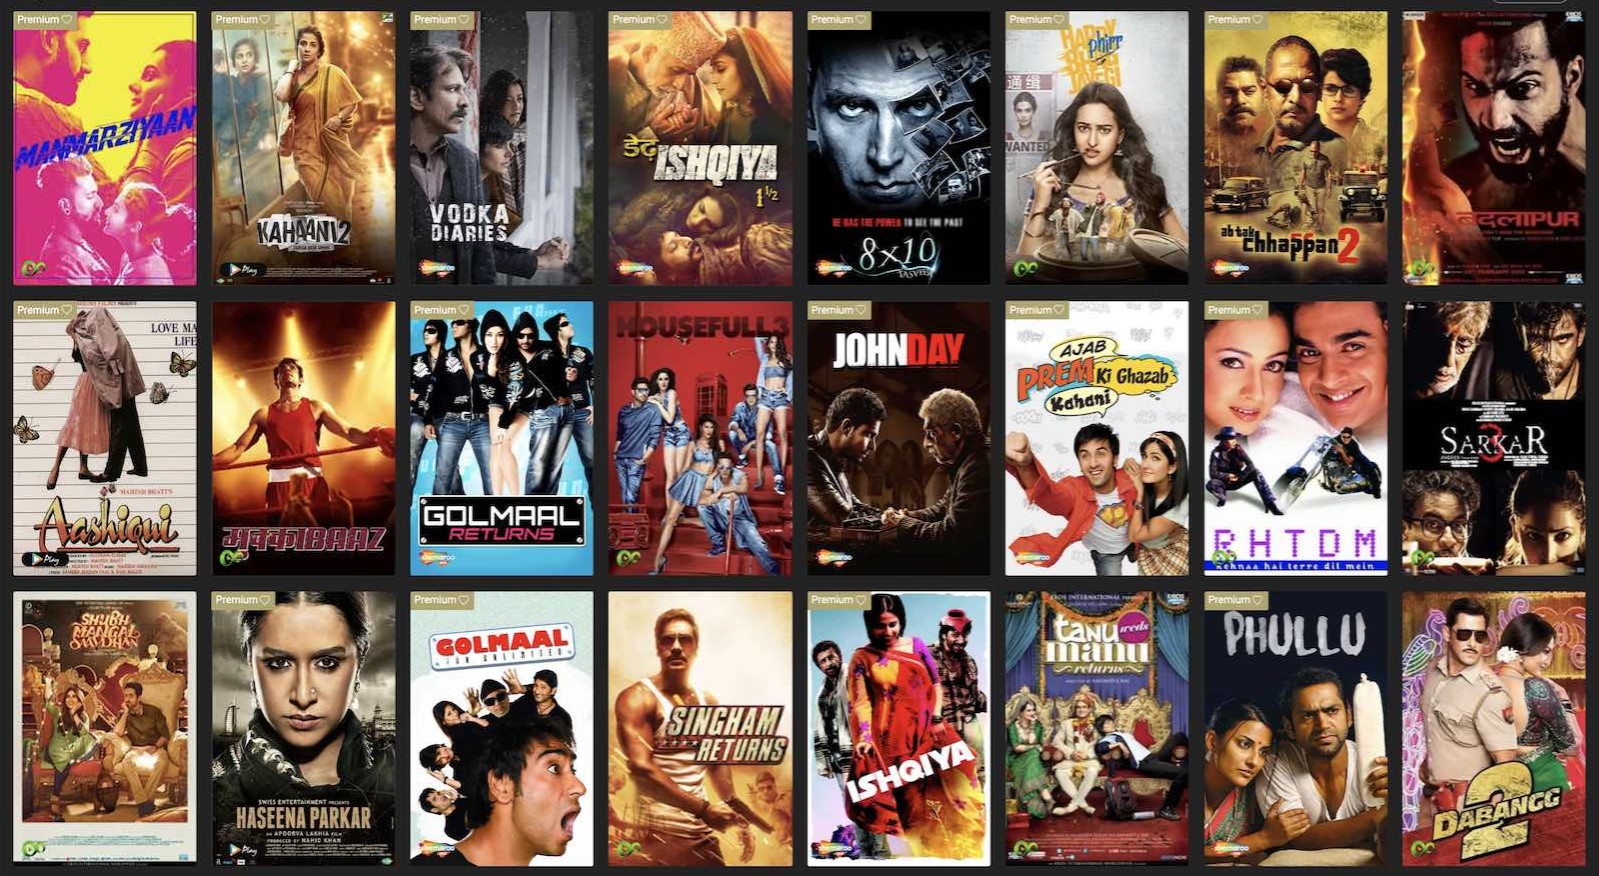 9kmovies Website 2021 - Hindi Latest Movies Download - Is it Legal?